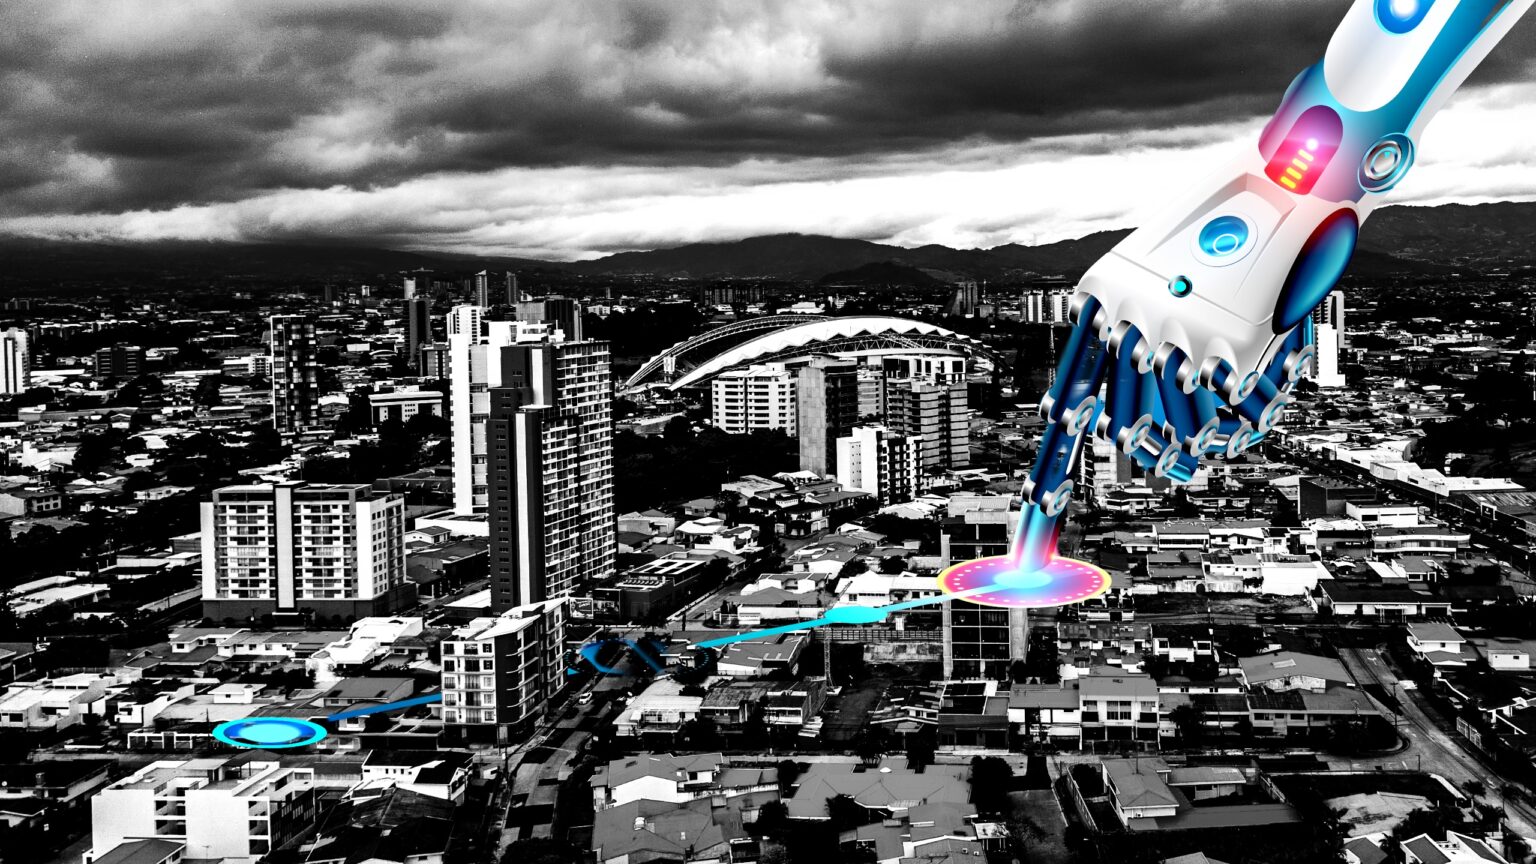 AI Chatbot ChatGPT Drafts Law for Regulation in Costa Rica